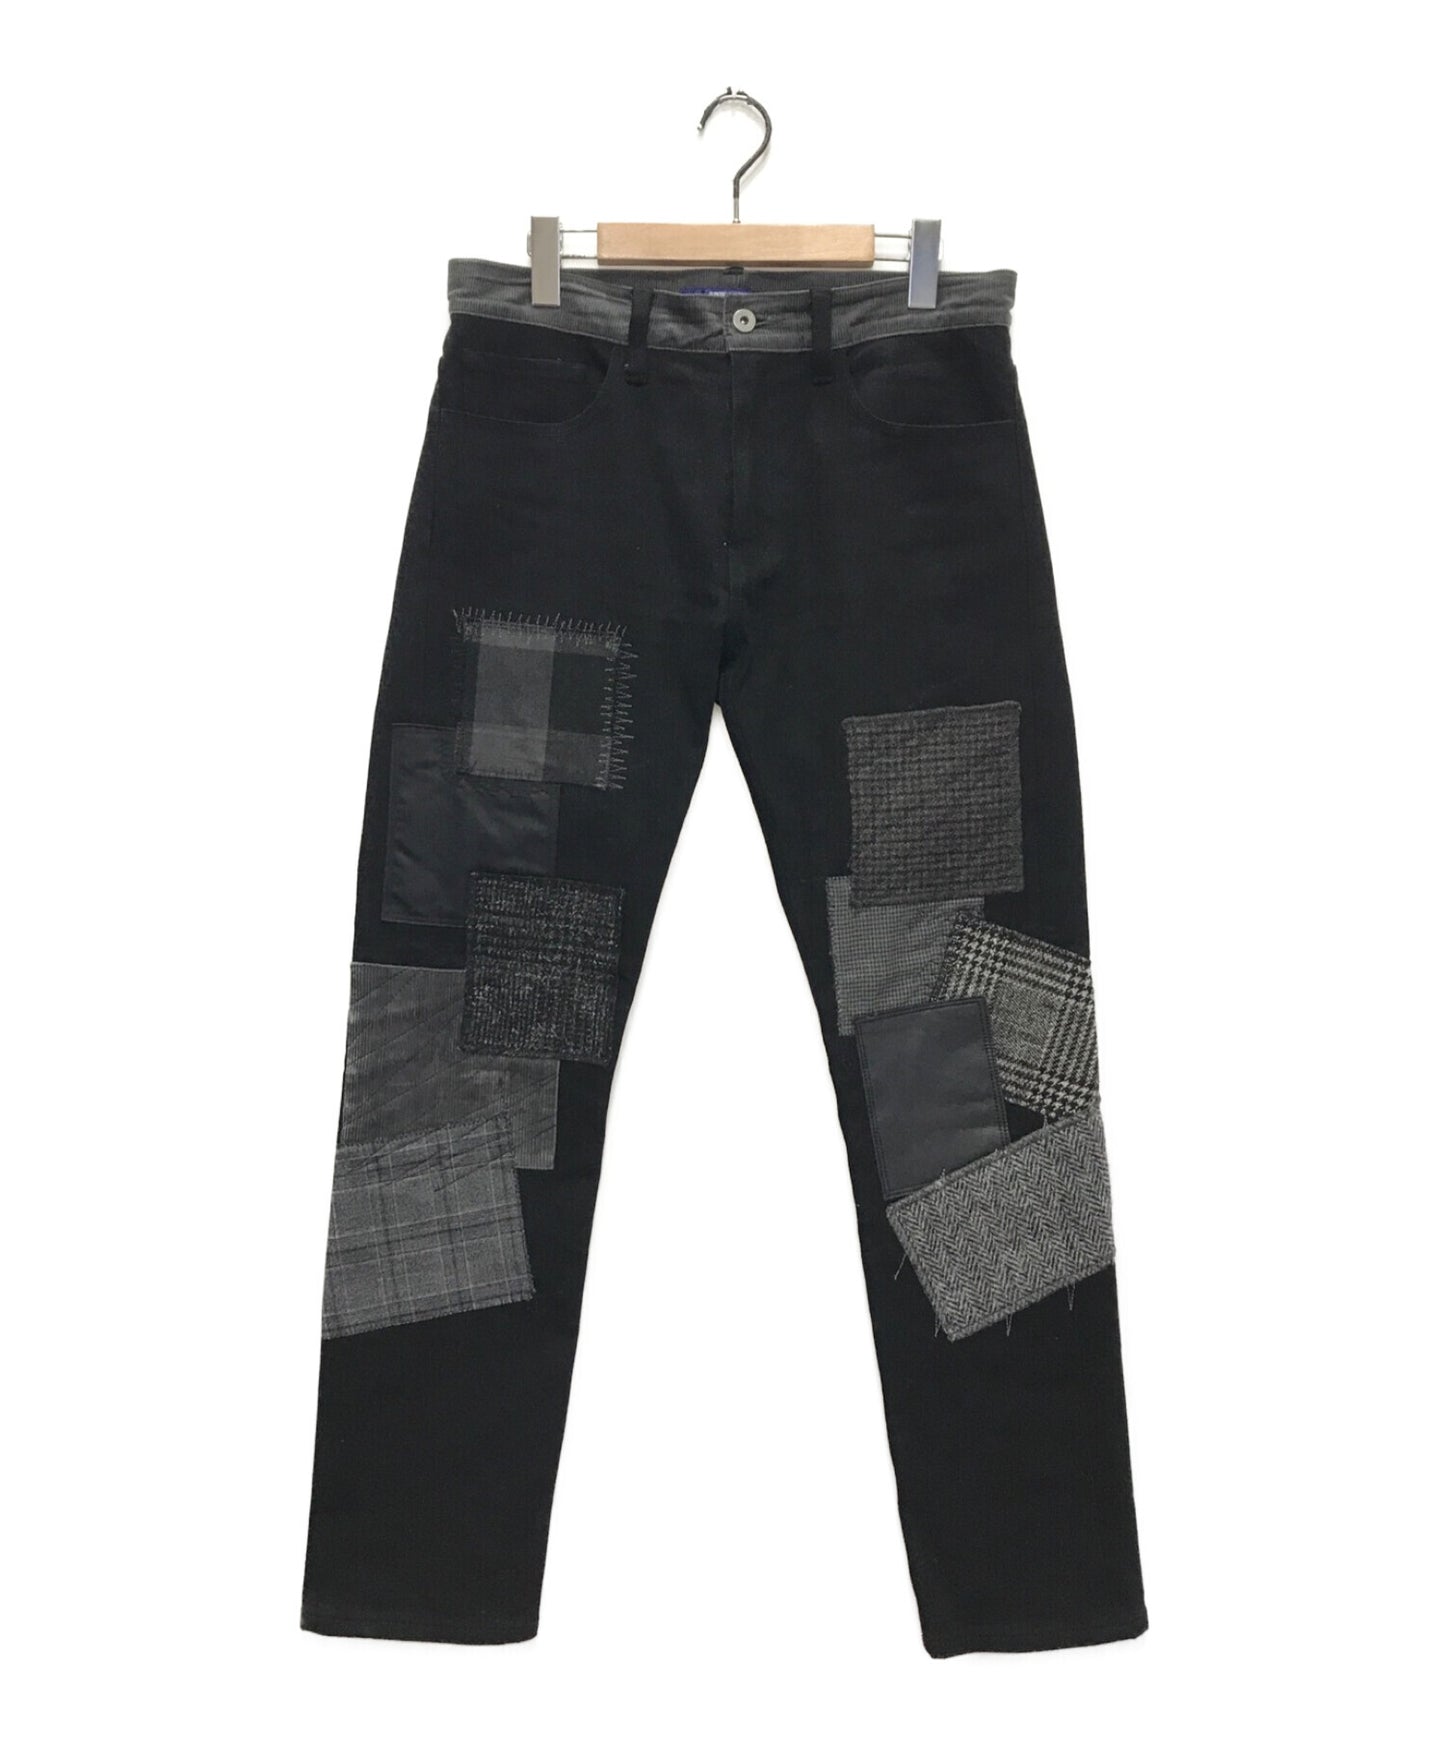 [Pre-owned] COMME des GARCONS JUNYA WATANABE MAN Multi-fabric patchwork pants WJ-P005